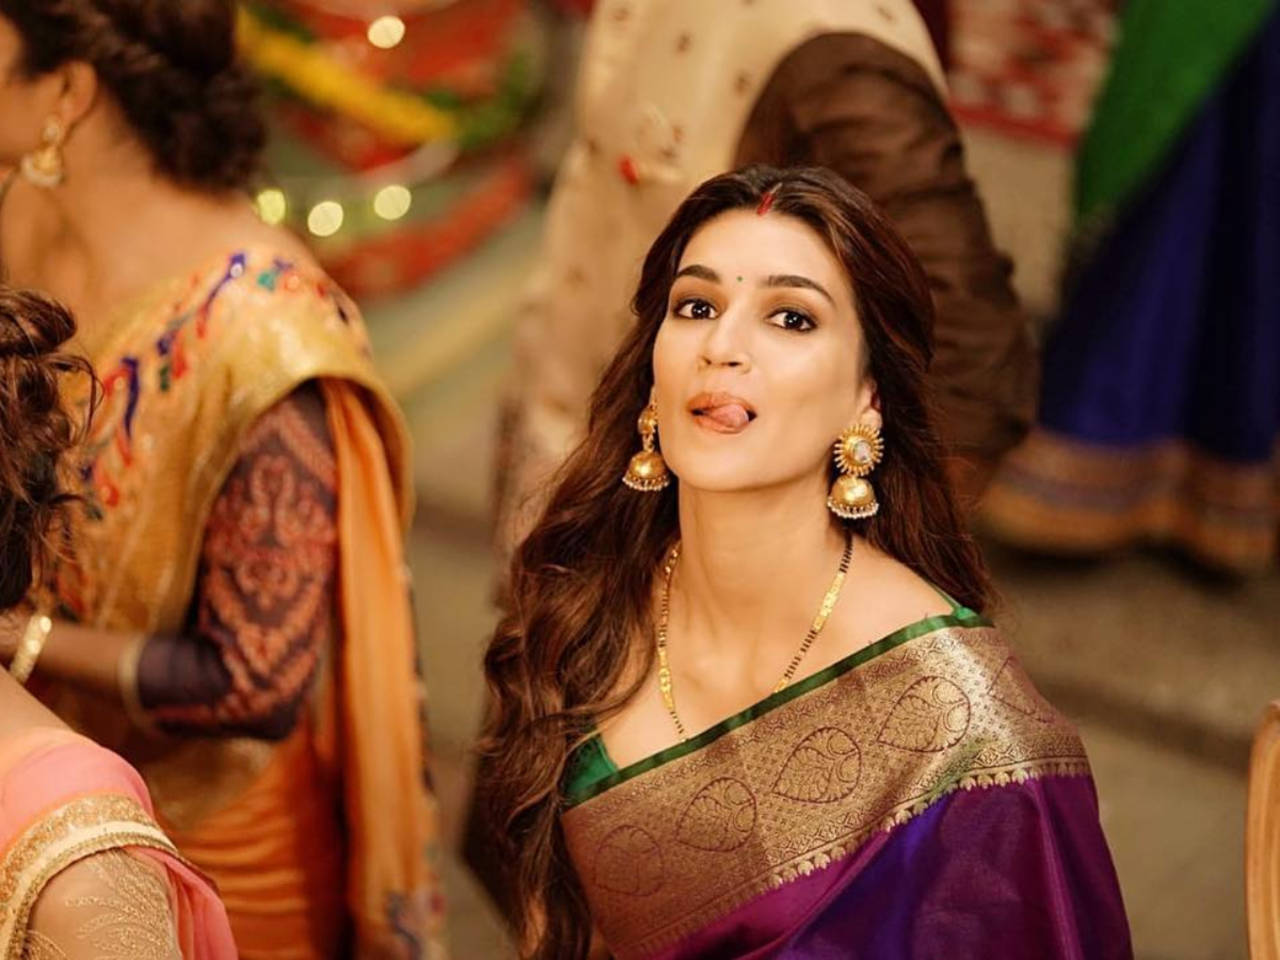 Did you know that Kriti Sanon donned a saree in 'Luka Chuppi' that ...